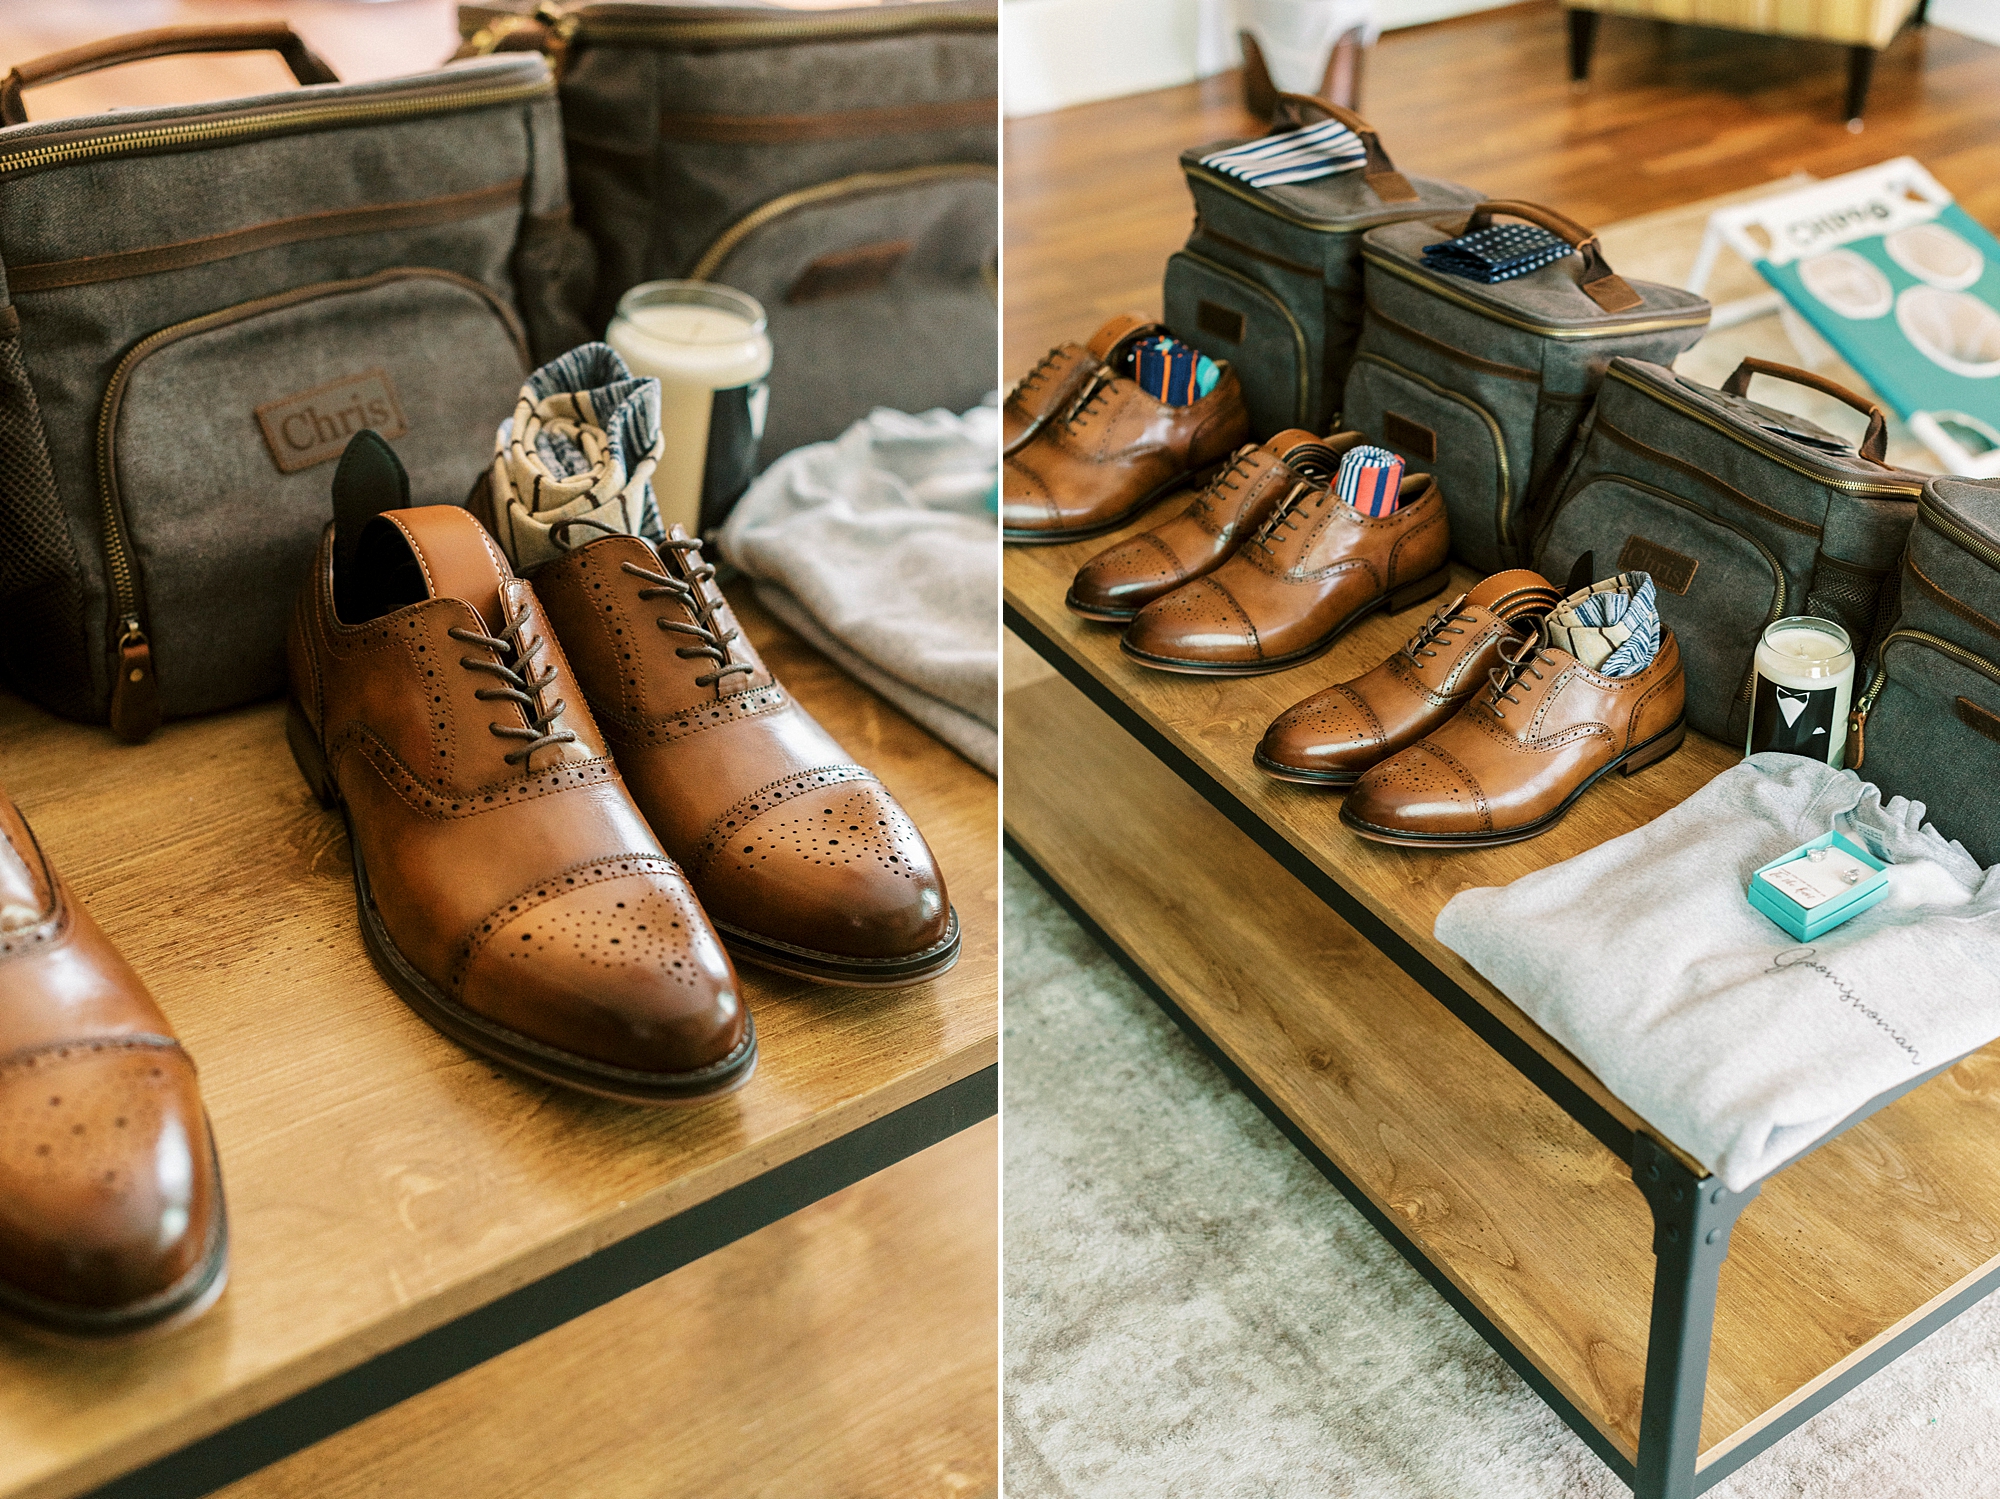 groom and groomsmen's shoes for wedding at Separk Mansion